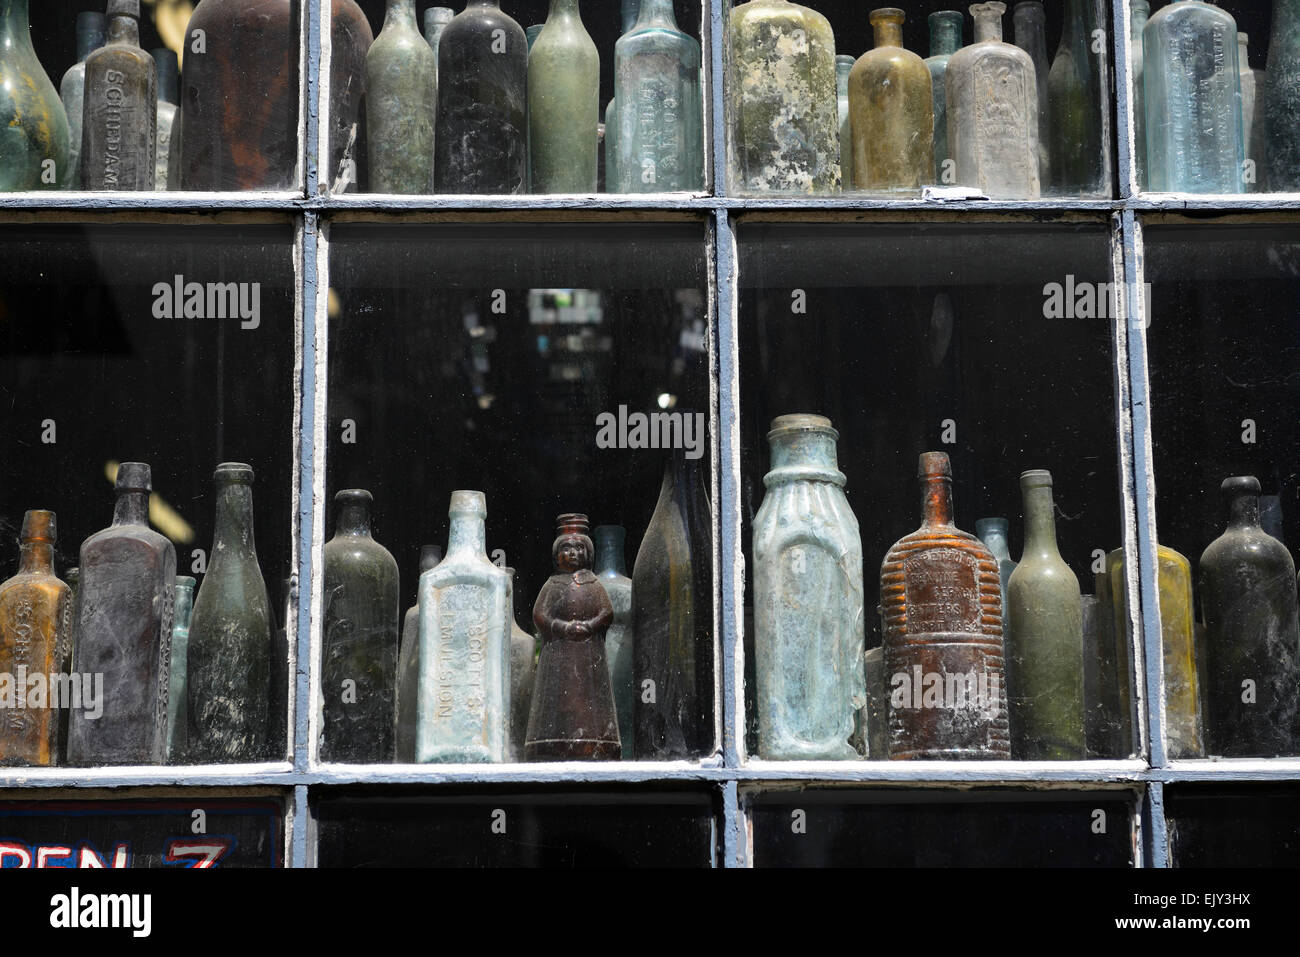 Hex Old World Witchery window display old antique bottles rue decatur french voodoo quarter new orleans louisiana RM USA Stock Photo